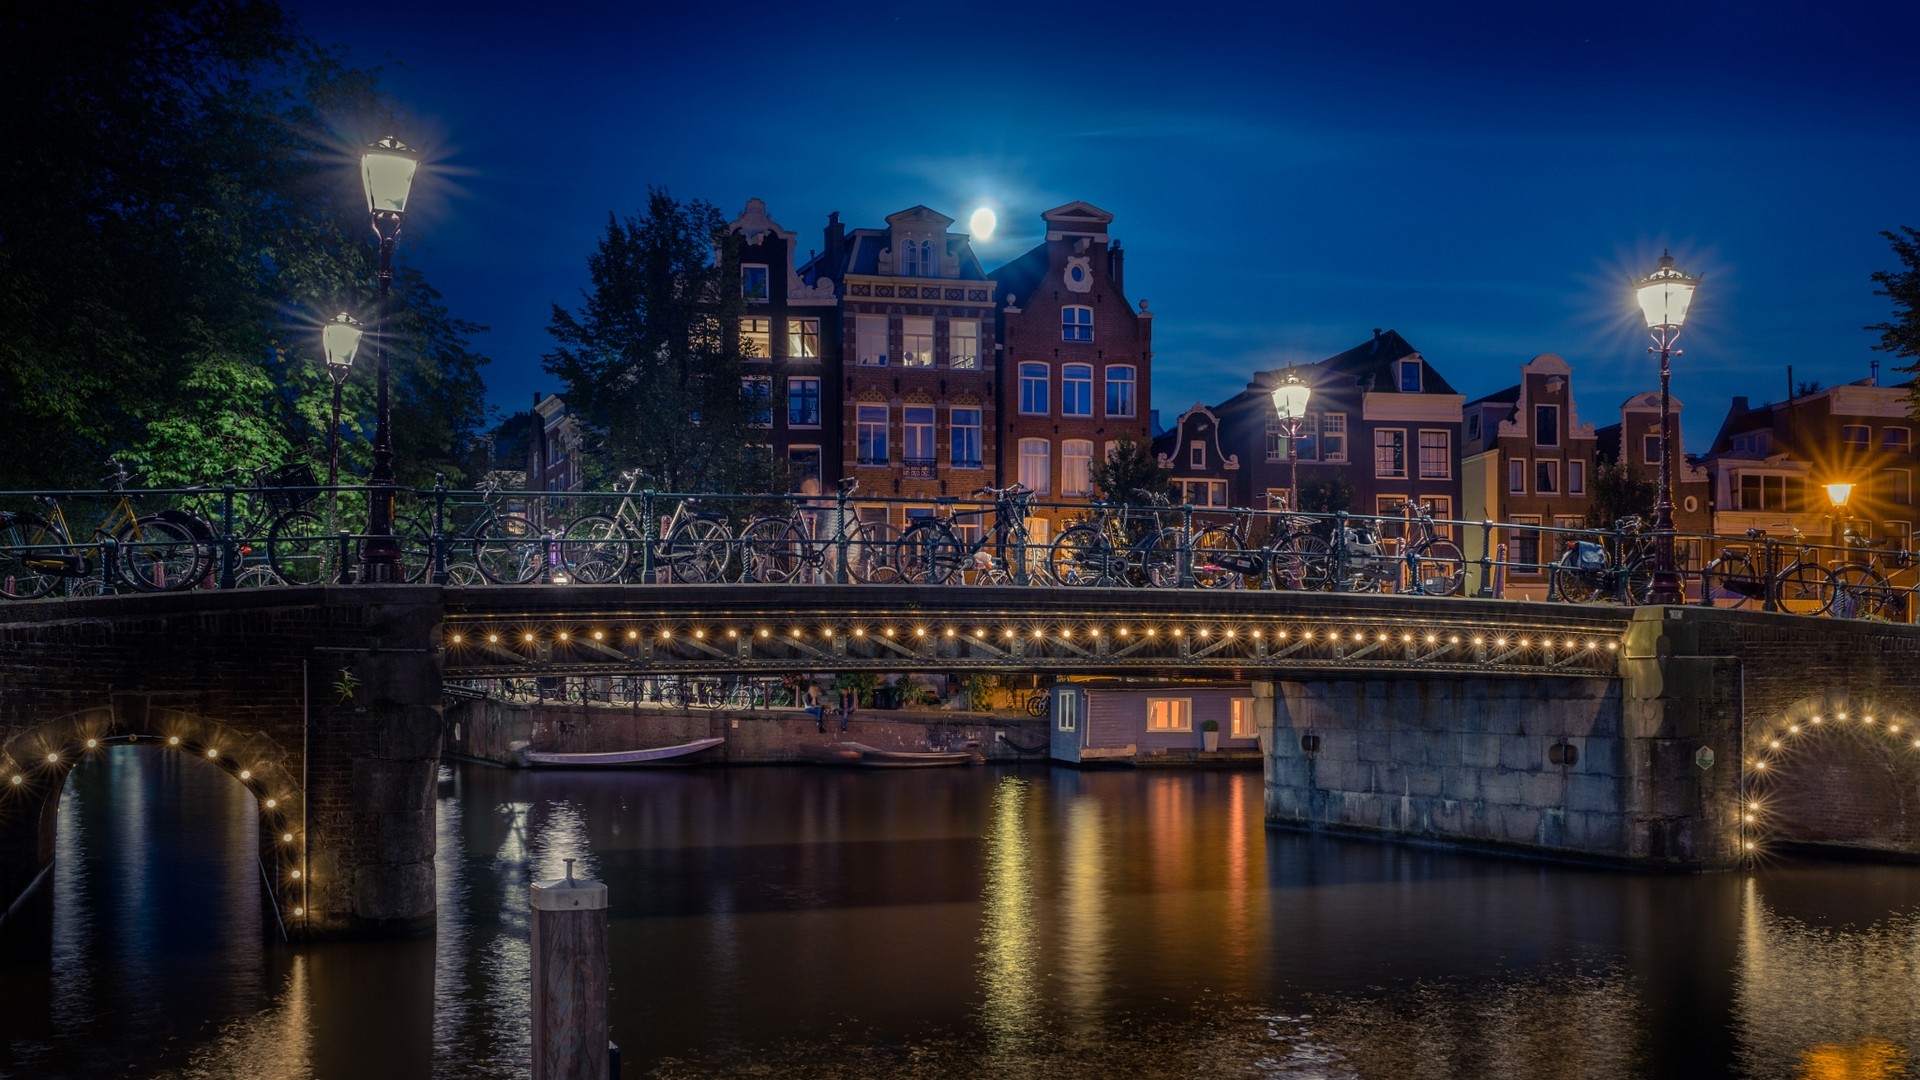 General 1920x1080 landscape Amsterdam bridge lights lantern canal Moon trees building house urban bicycle evening water Netherlands